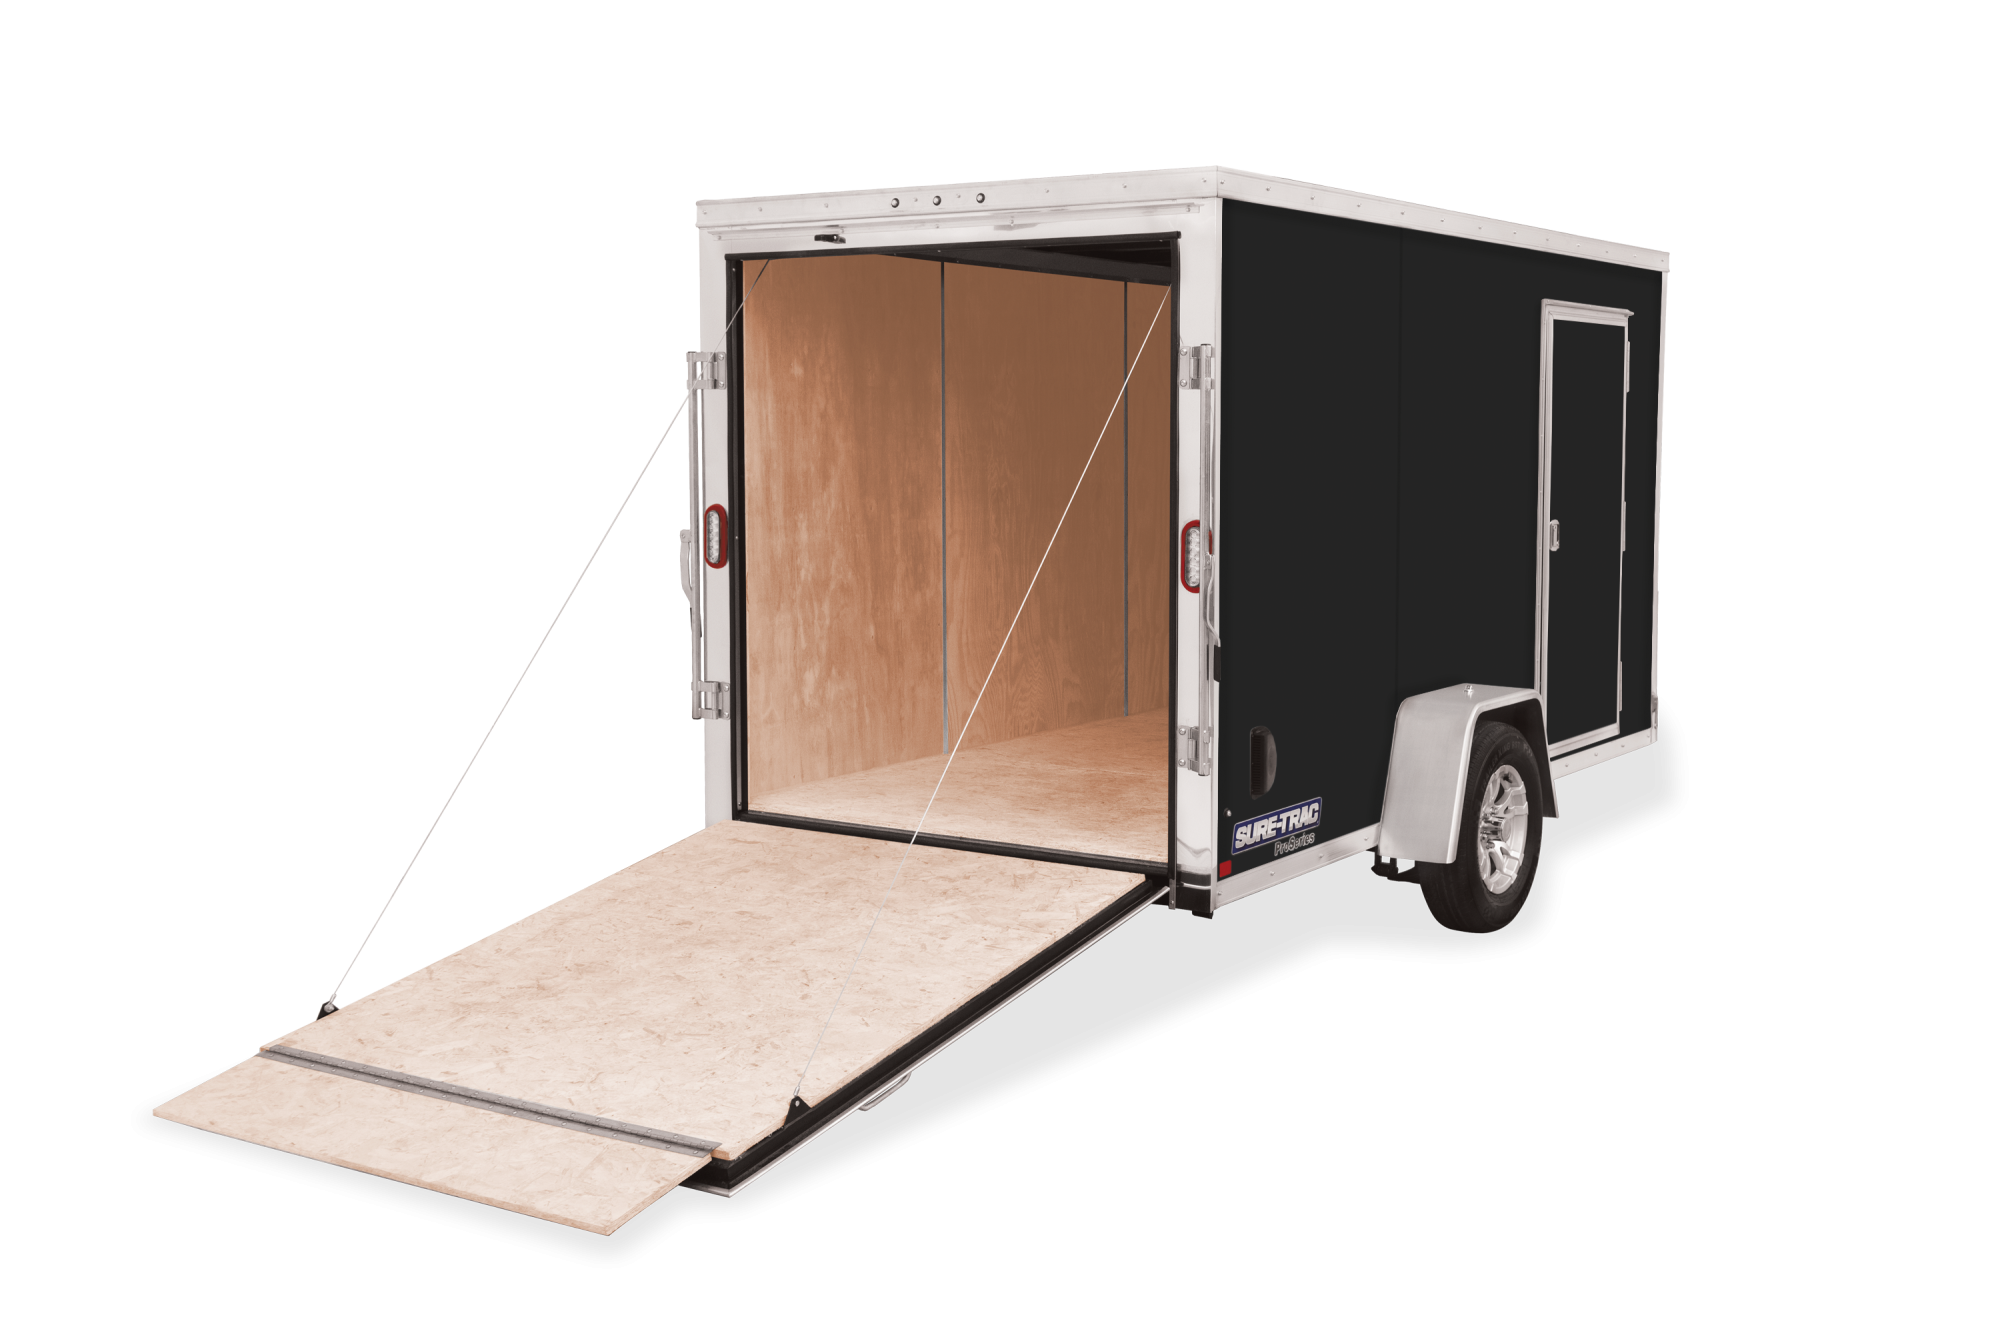 Sure-Trac | 5' & 6' Wide Pro Series Wedge Front Enclosed Trailer | Image | Rear view, tilted, Black Single Axle Pro Series Wedge Front Enclosed Trailer, rear down